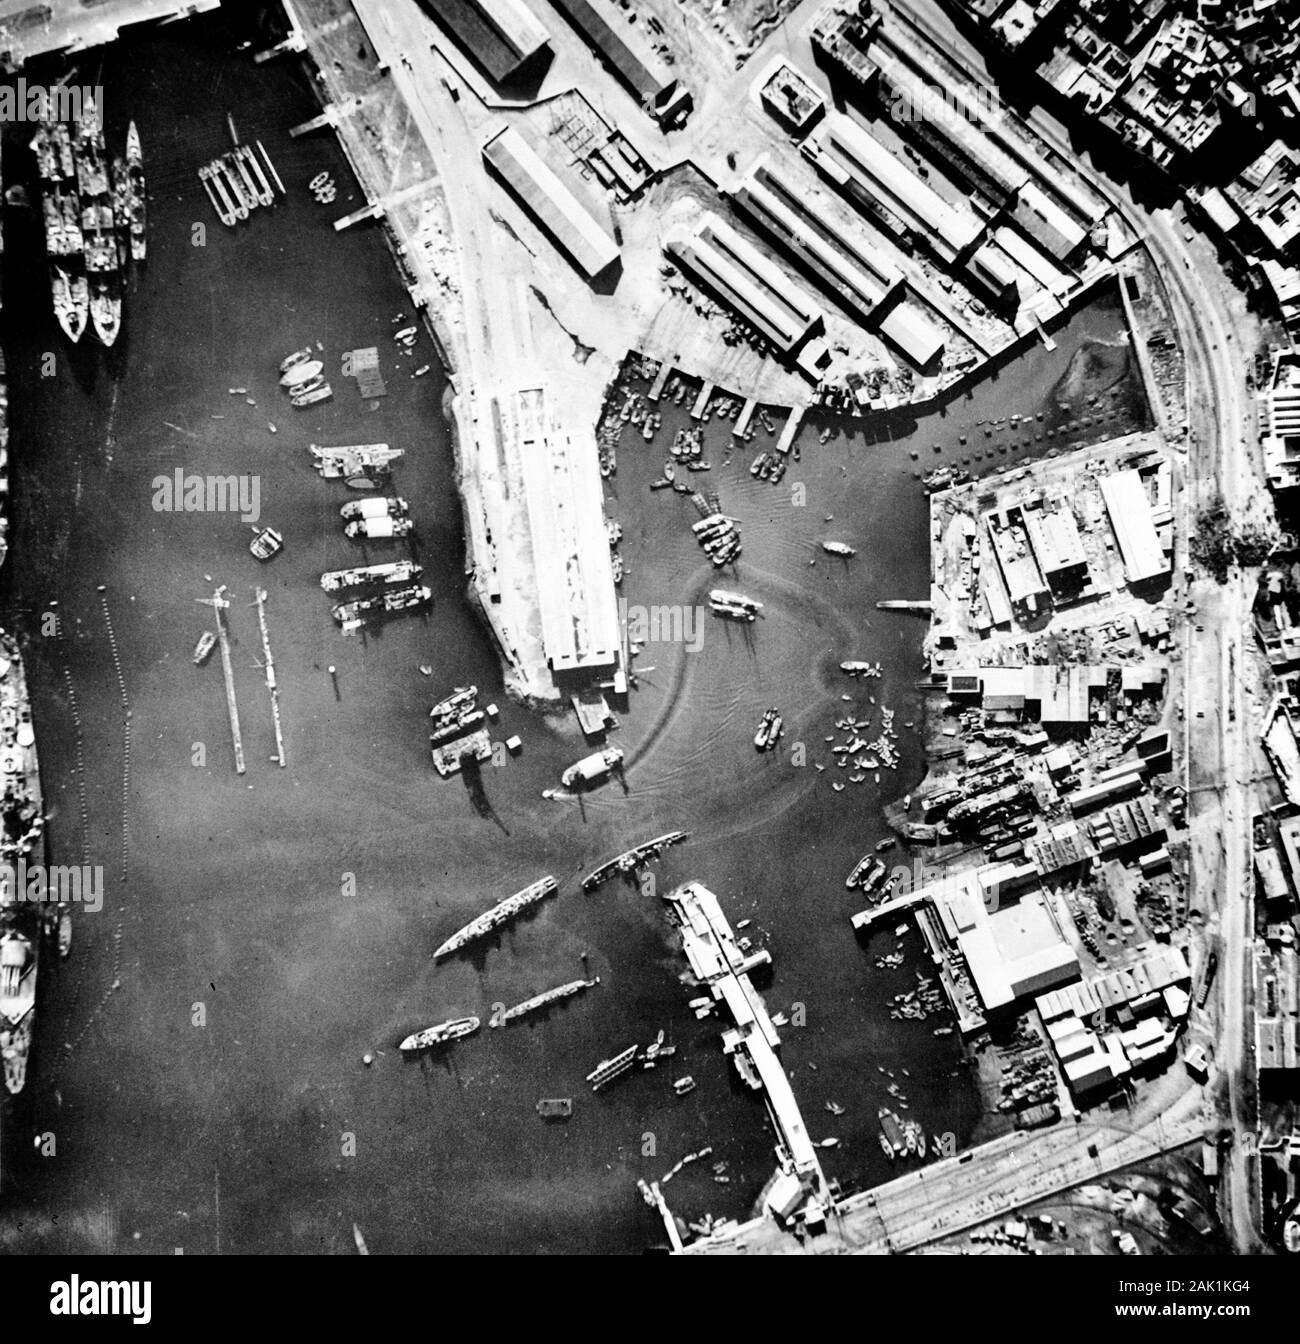 Aerial view of the port of Casablanca, Morocco, at the time of the Allied landings in North Africa. Note the sunken ship in the center of the harbour and the French battleship Jean Bart on the left. November 9, 1942 Stock Photo